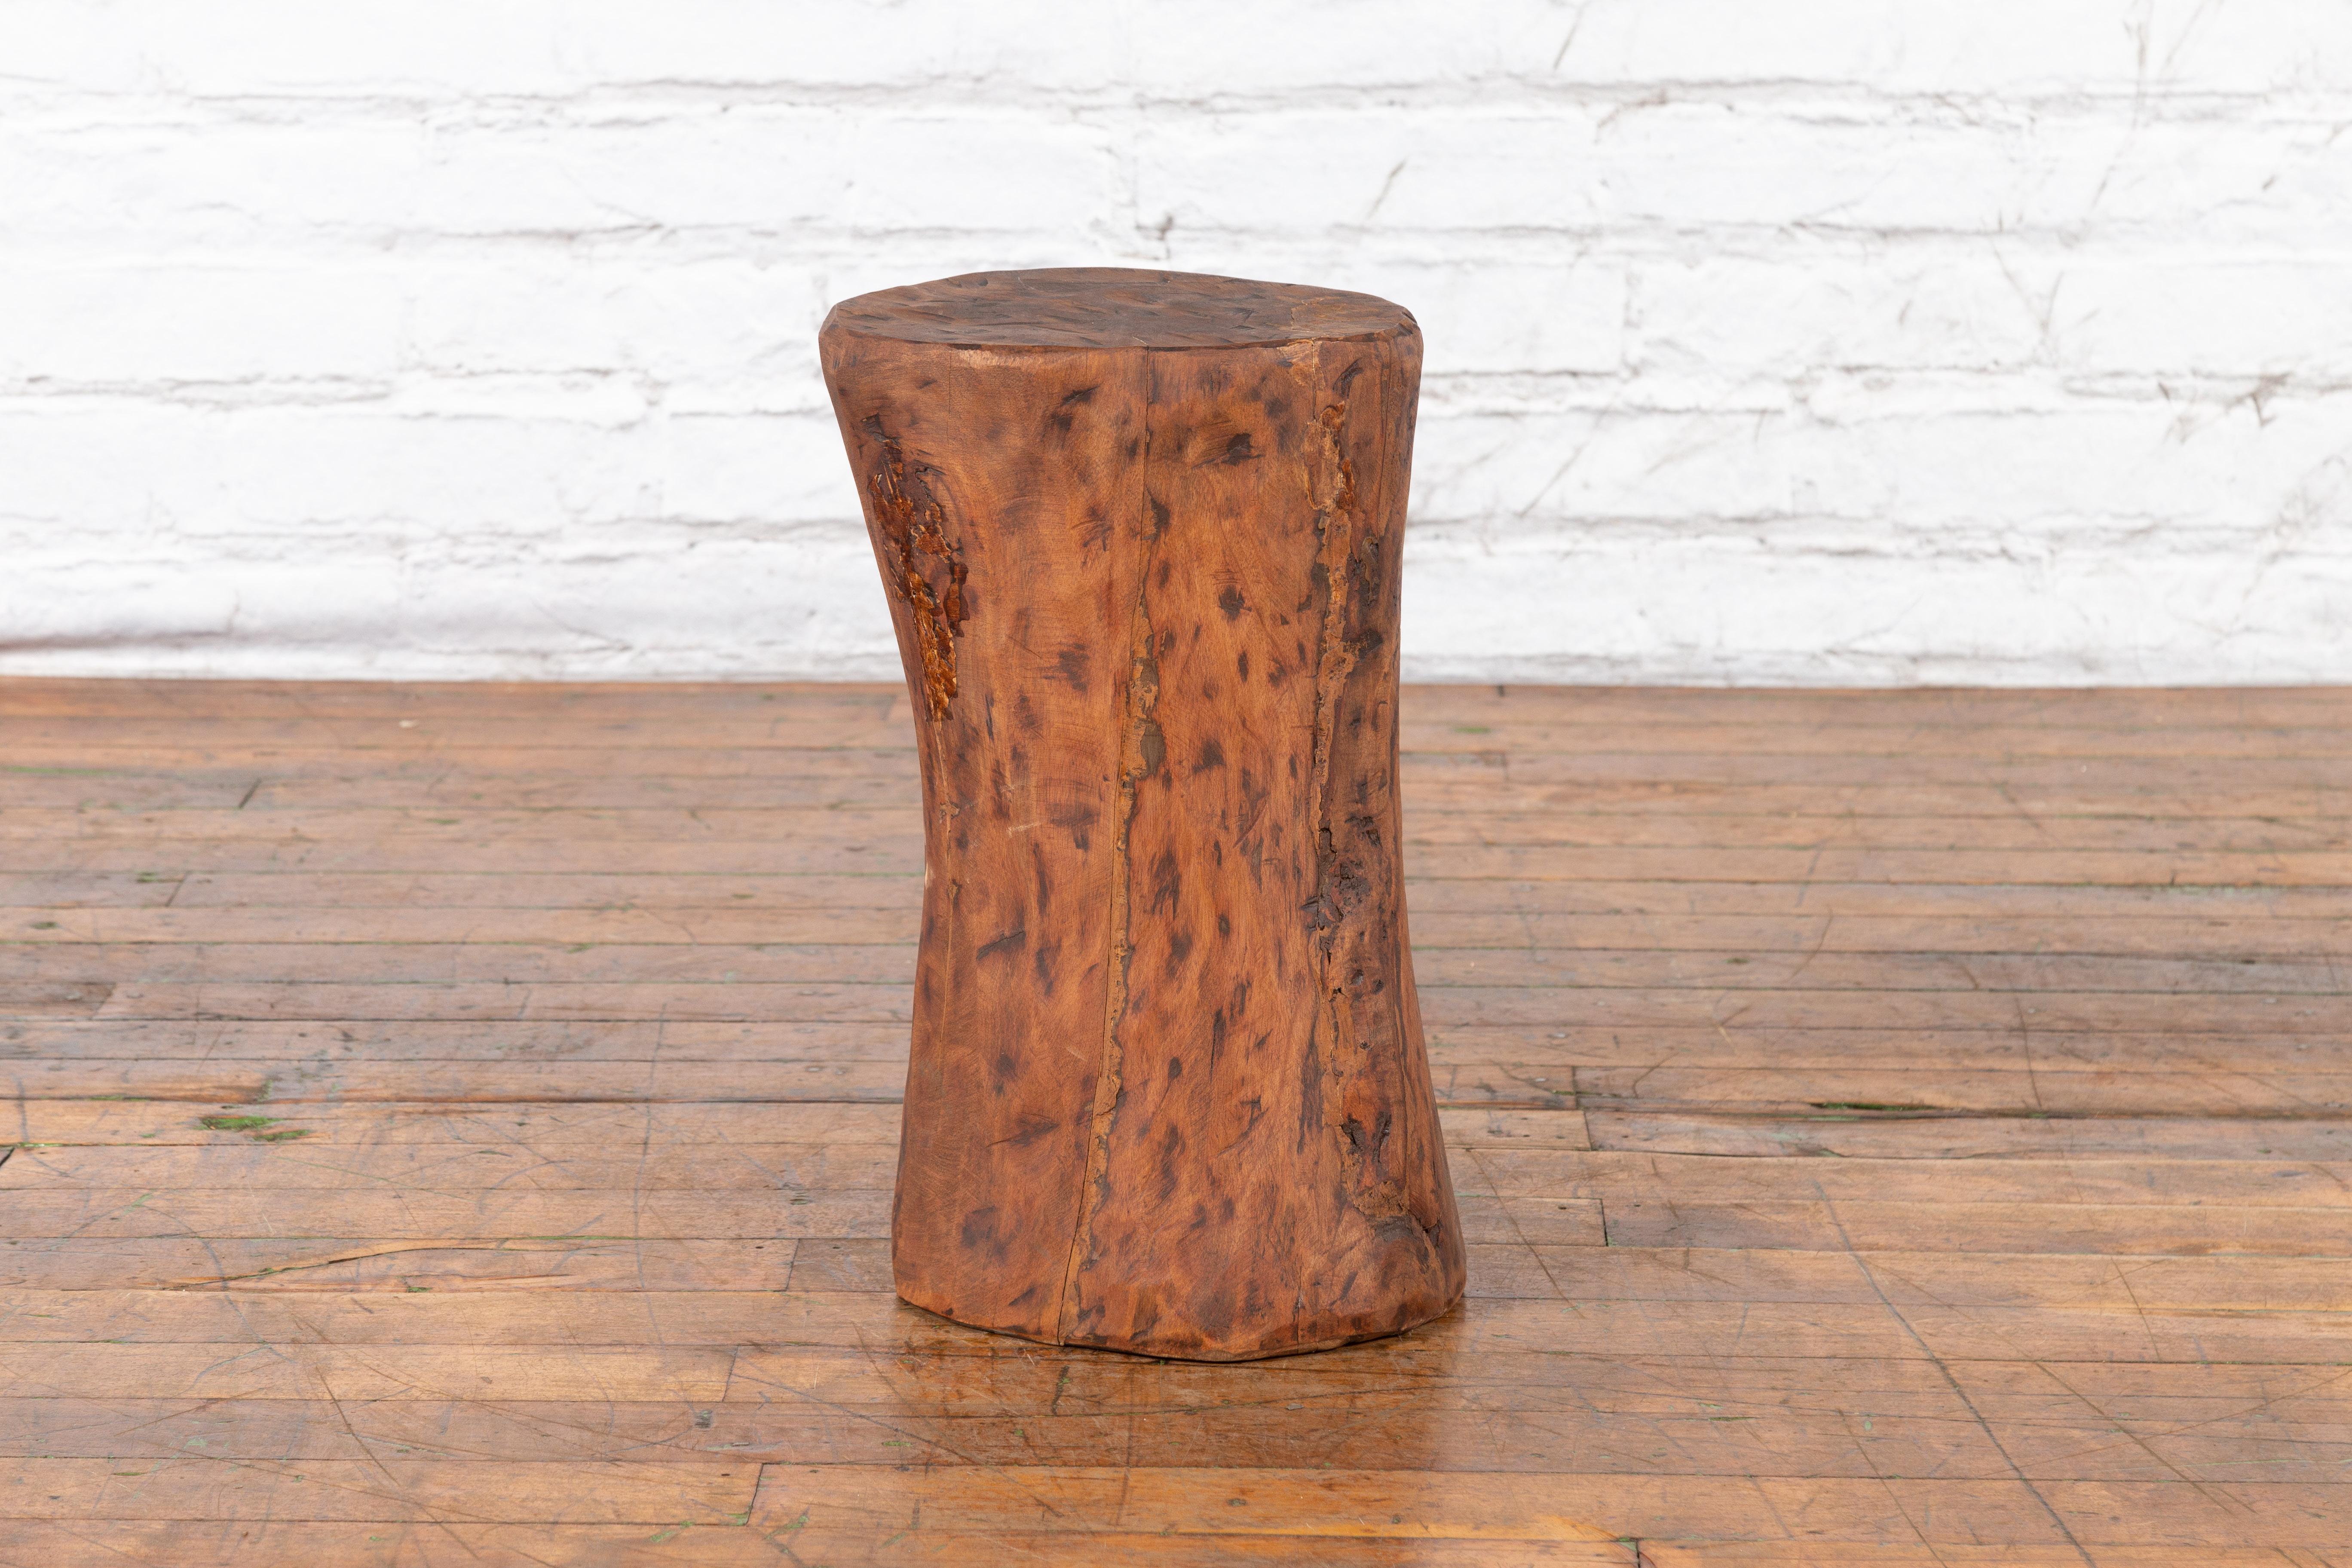 A vintage rustic Chinese wooden tree stump pedestal from the mid 20th century with distressed patina. Created in China during the Midcentury period, this wooden pedestal charms us with its nice rustic appearance and brown textured body. Flat at the